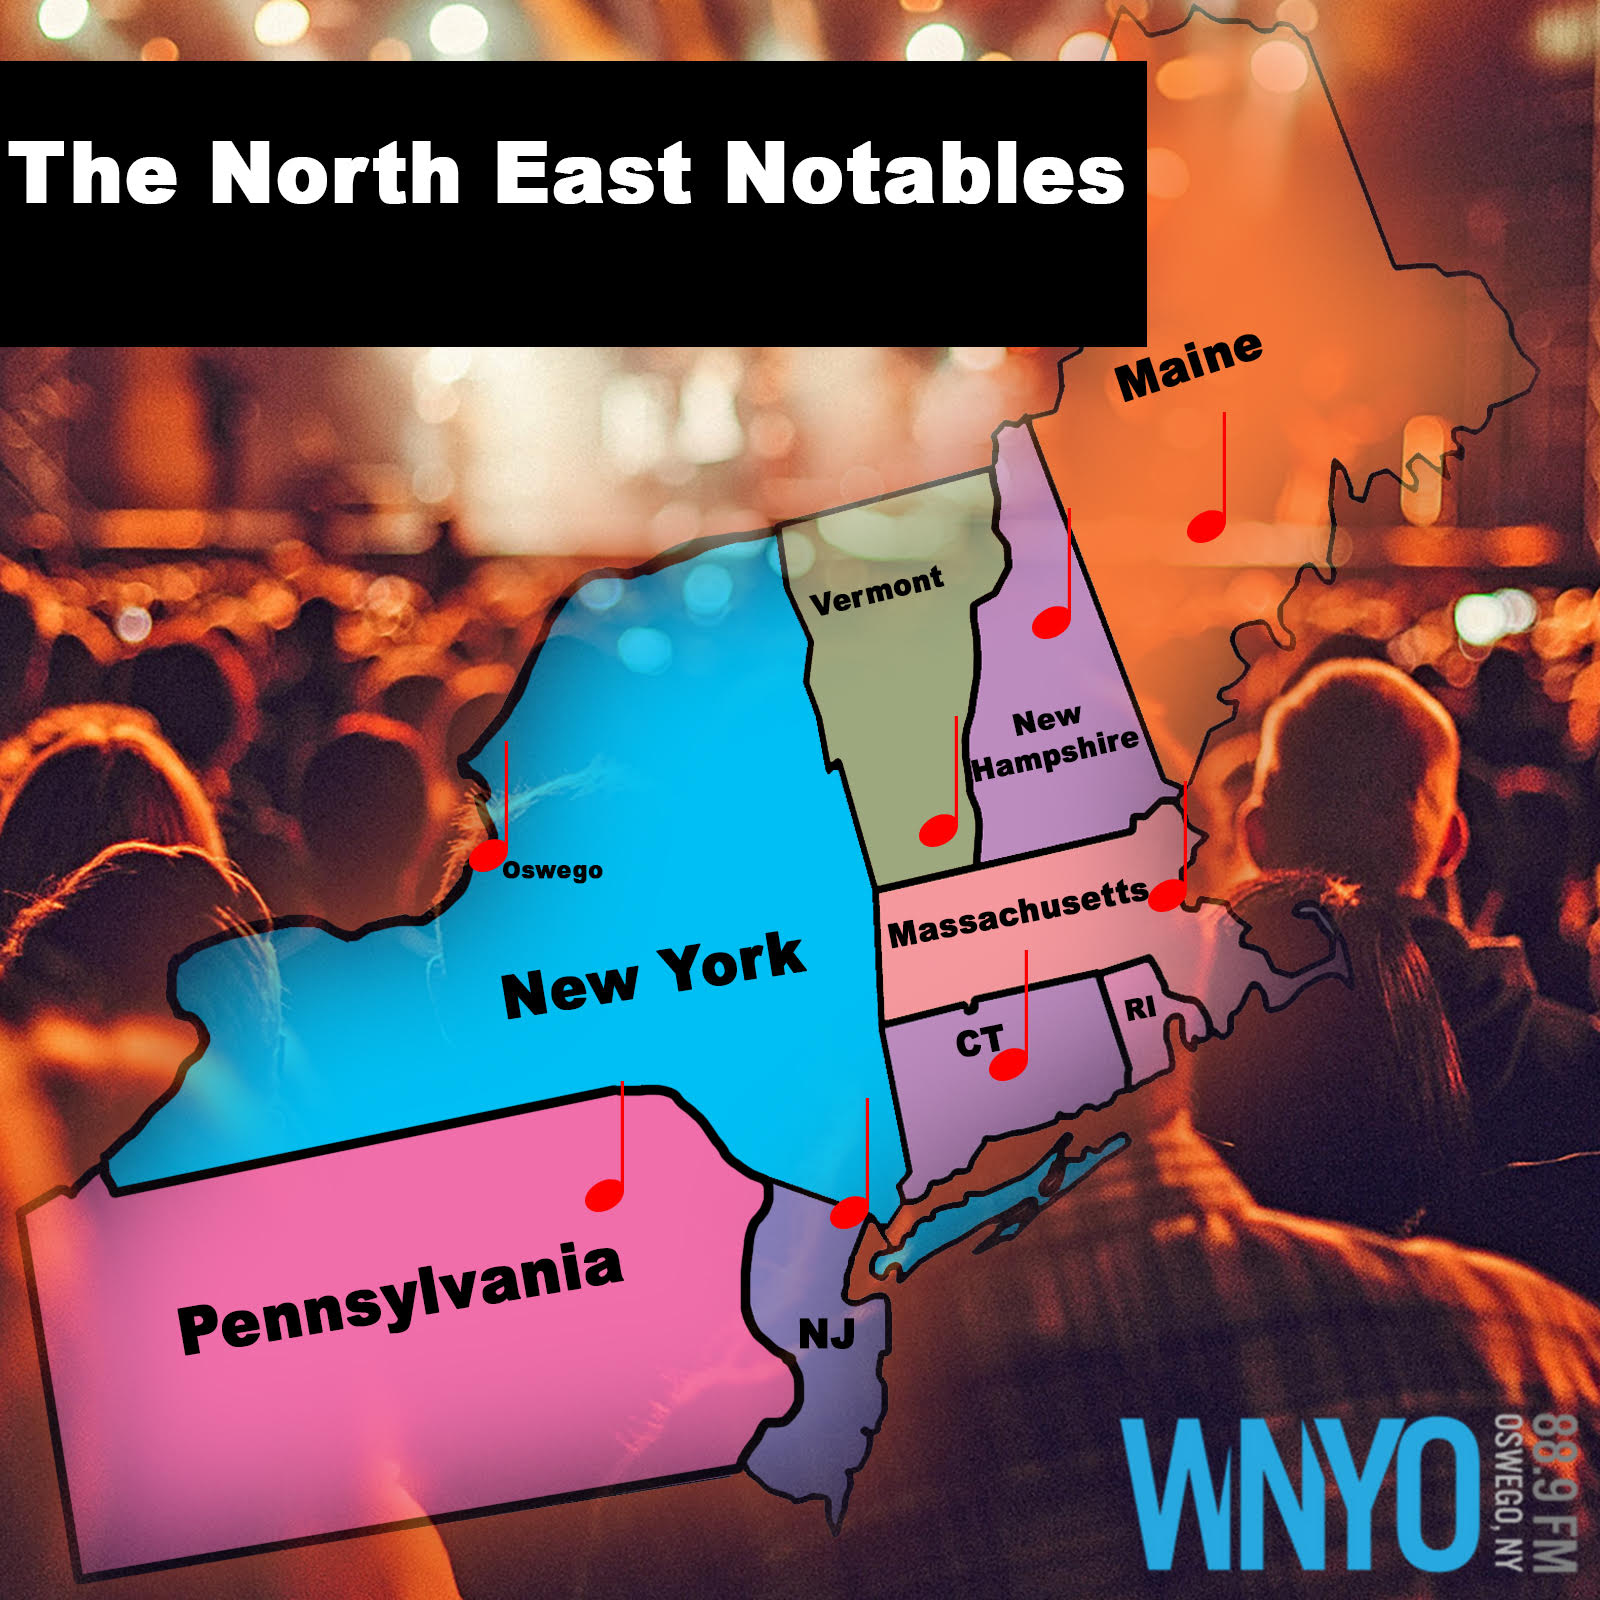 The North East Notables